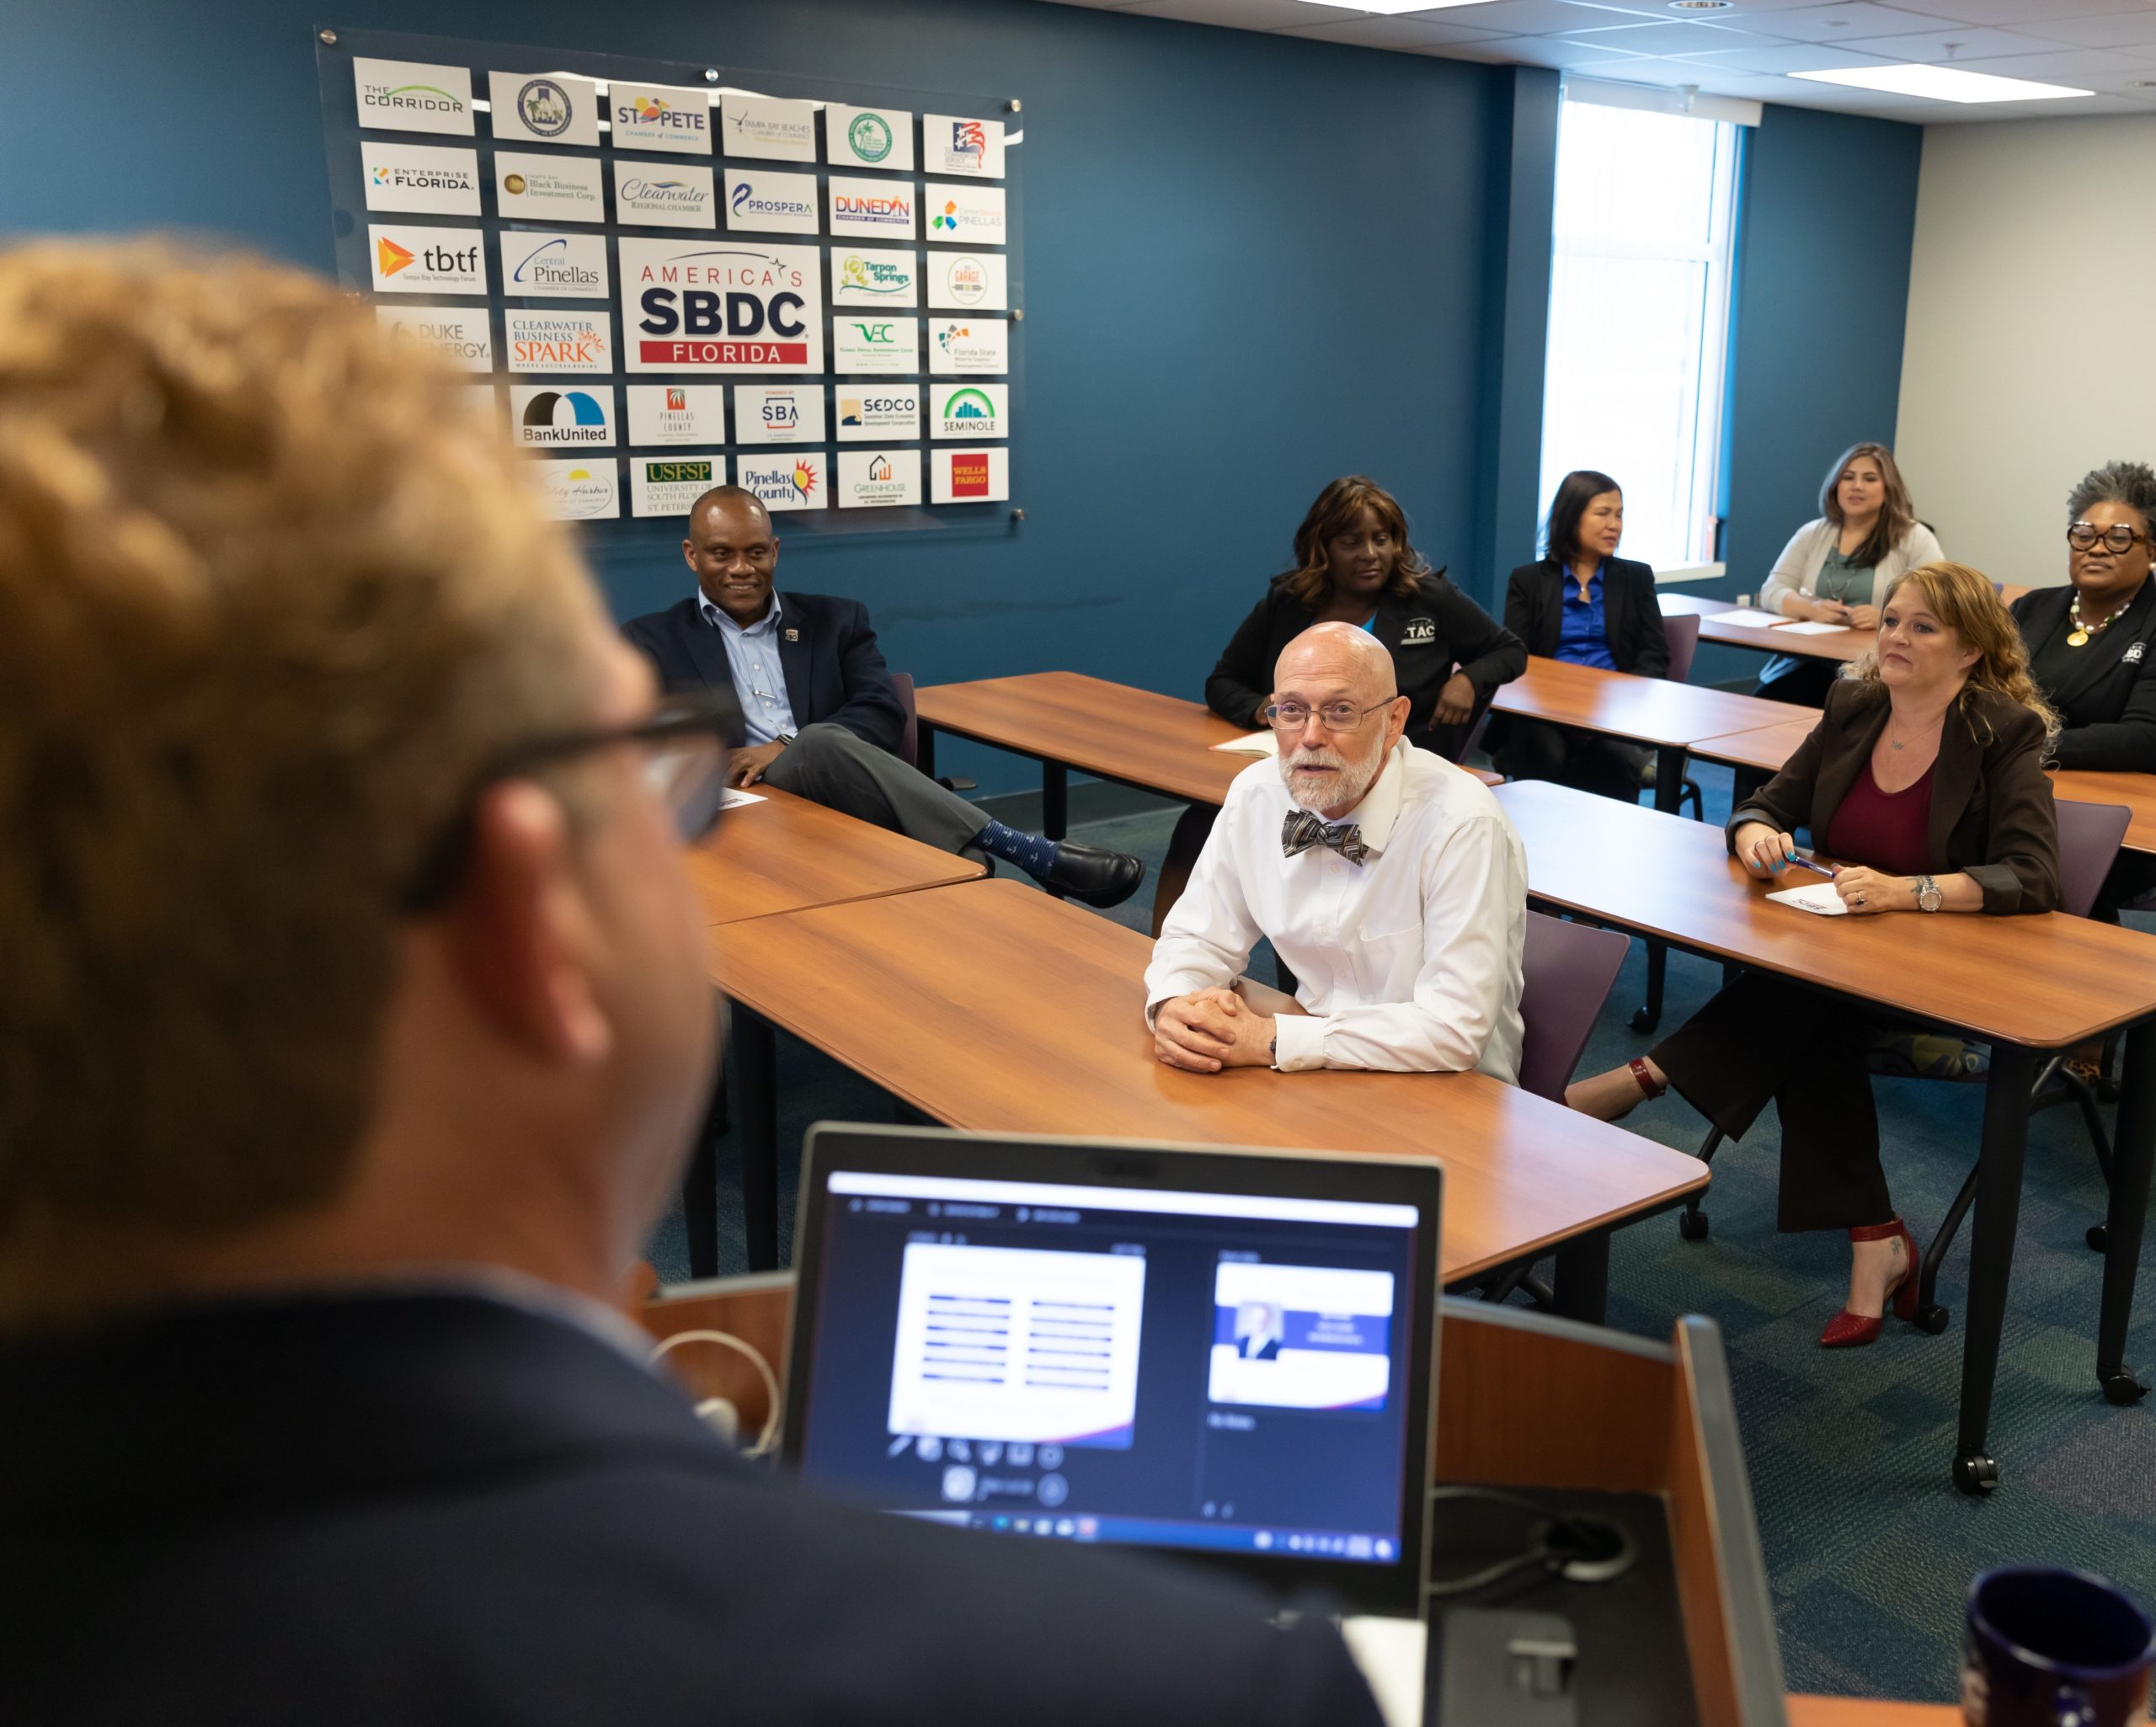 An image of a person leading a small business workshop in a meeting room with attendees at conference tables giving attention to the presenter.